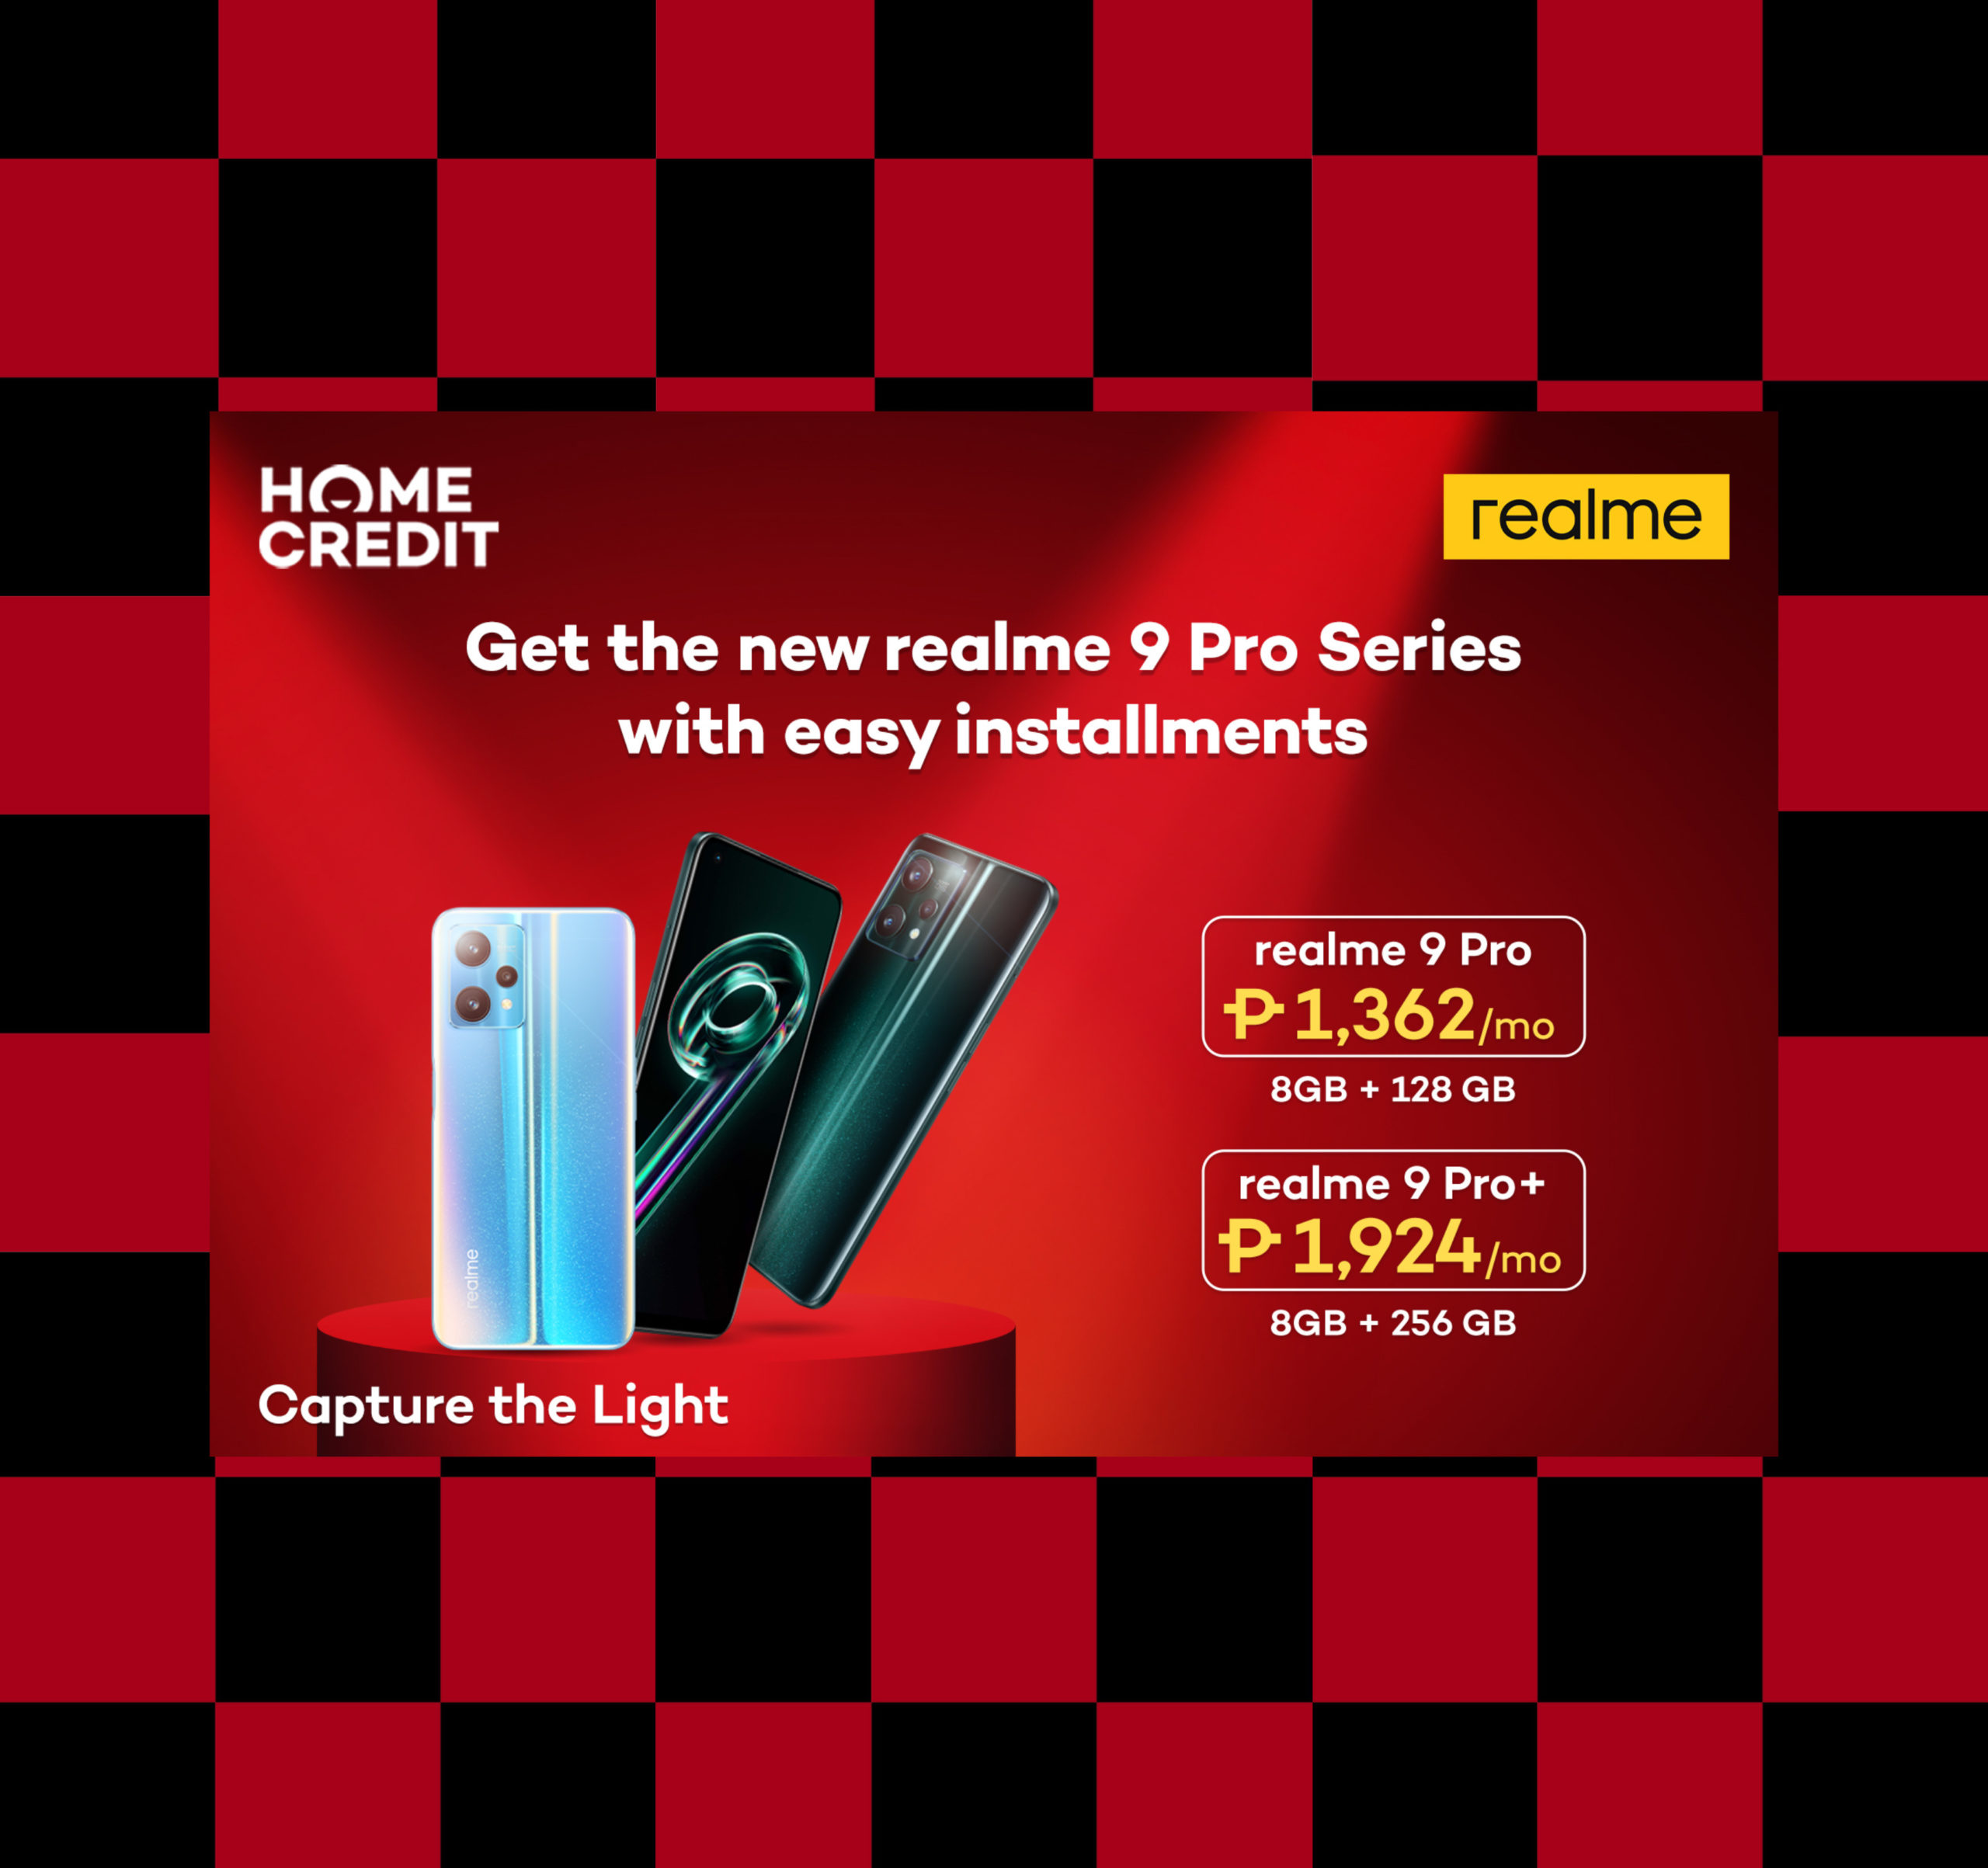 Realme 9 Pro - Buy, Rent, Pay in Installments